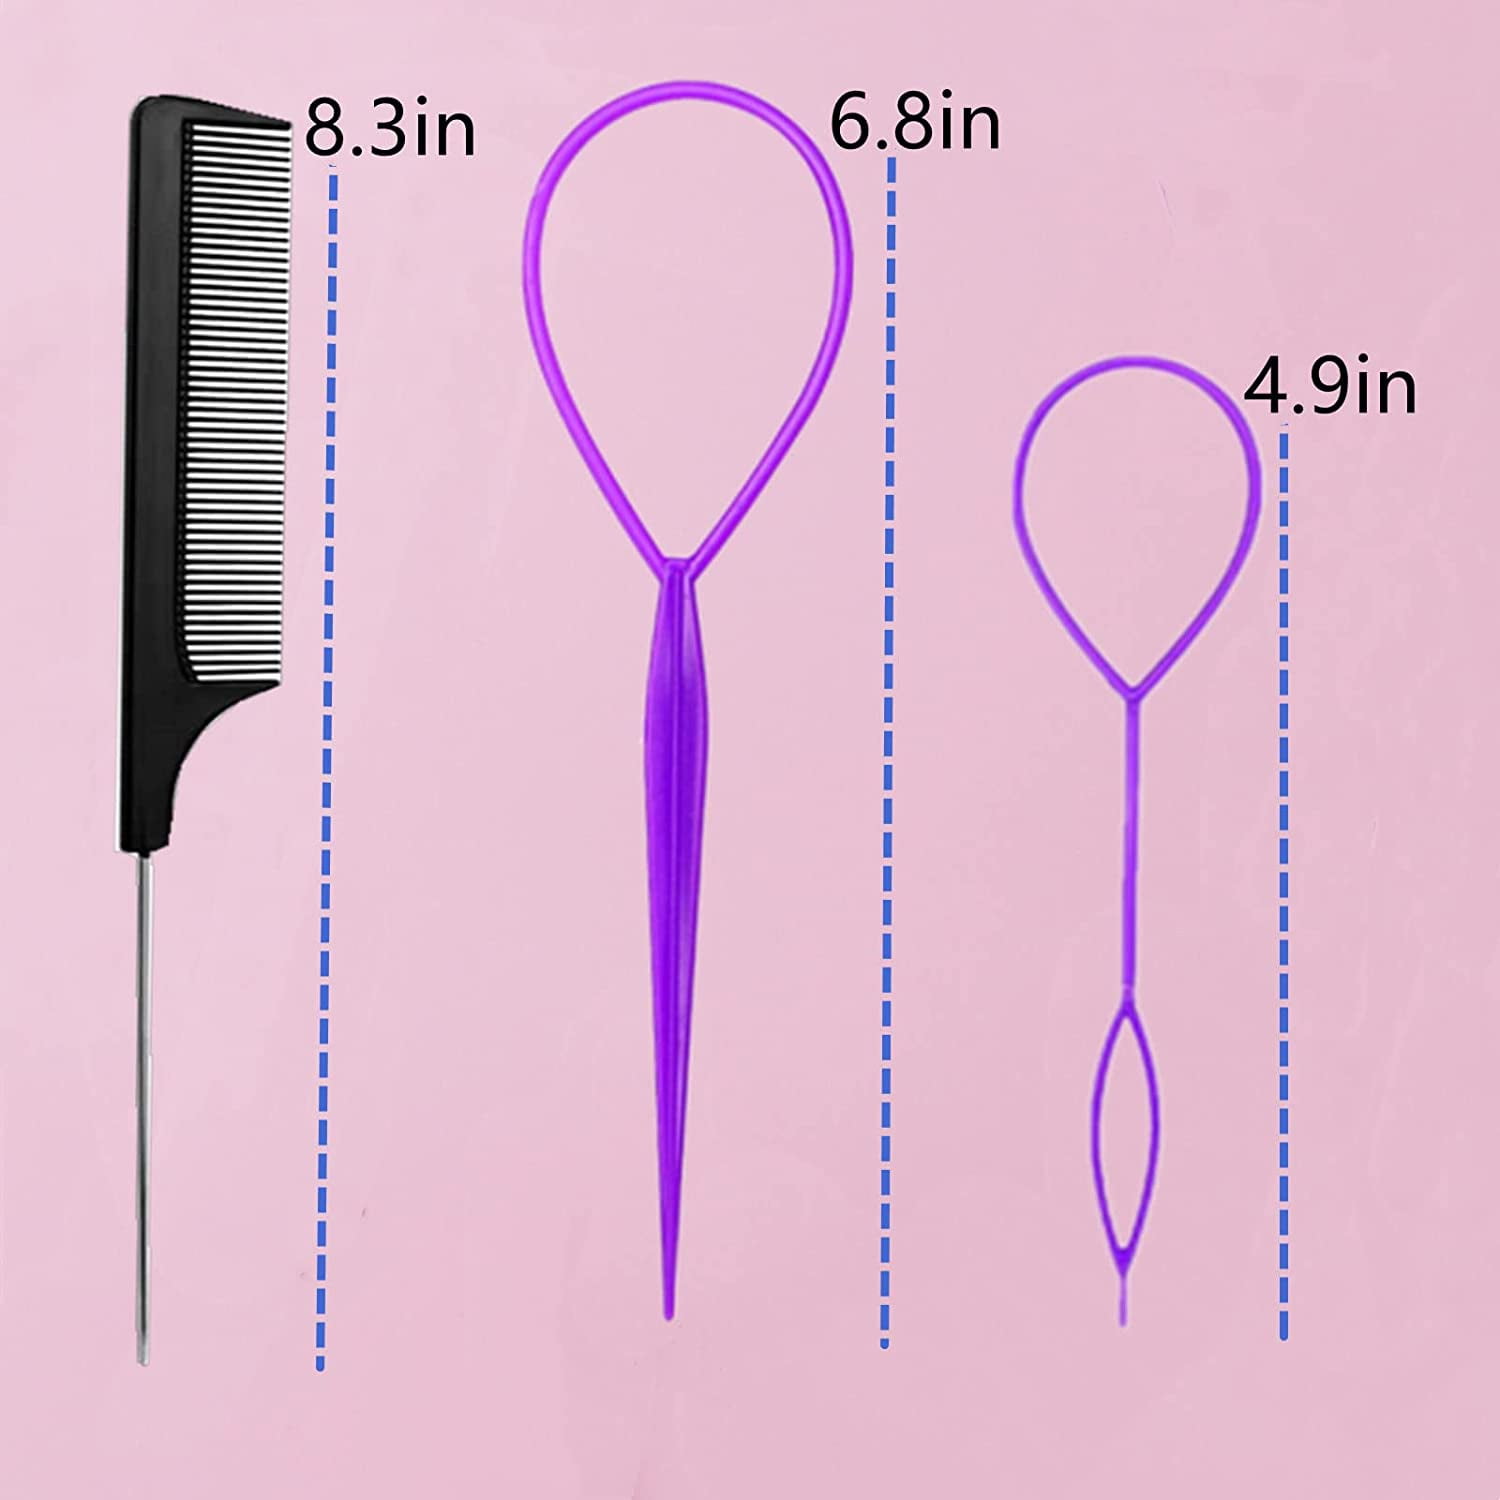 Topsy Tail Hair Tool,Hair Loop Styling French Braid Pull Through Beader Tool  Braiding Comb for Parting Rat Tail Combs Tools for Girls Supplies(1set)